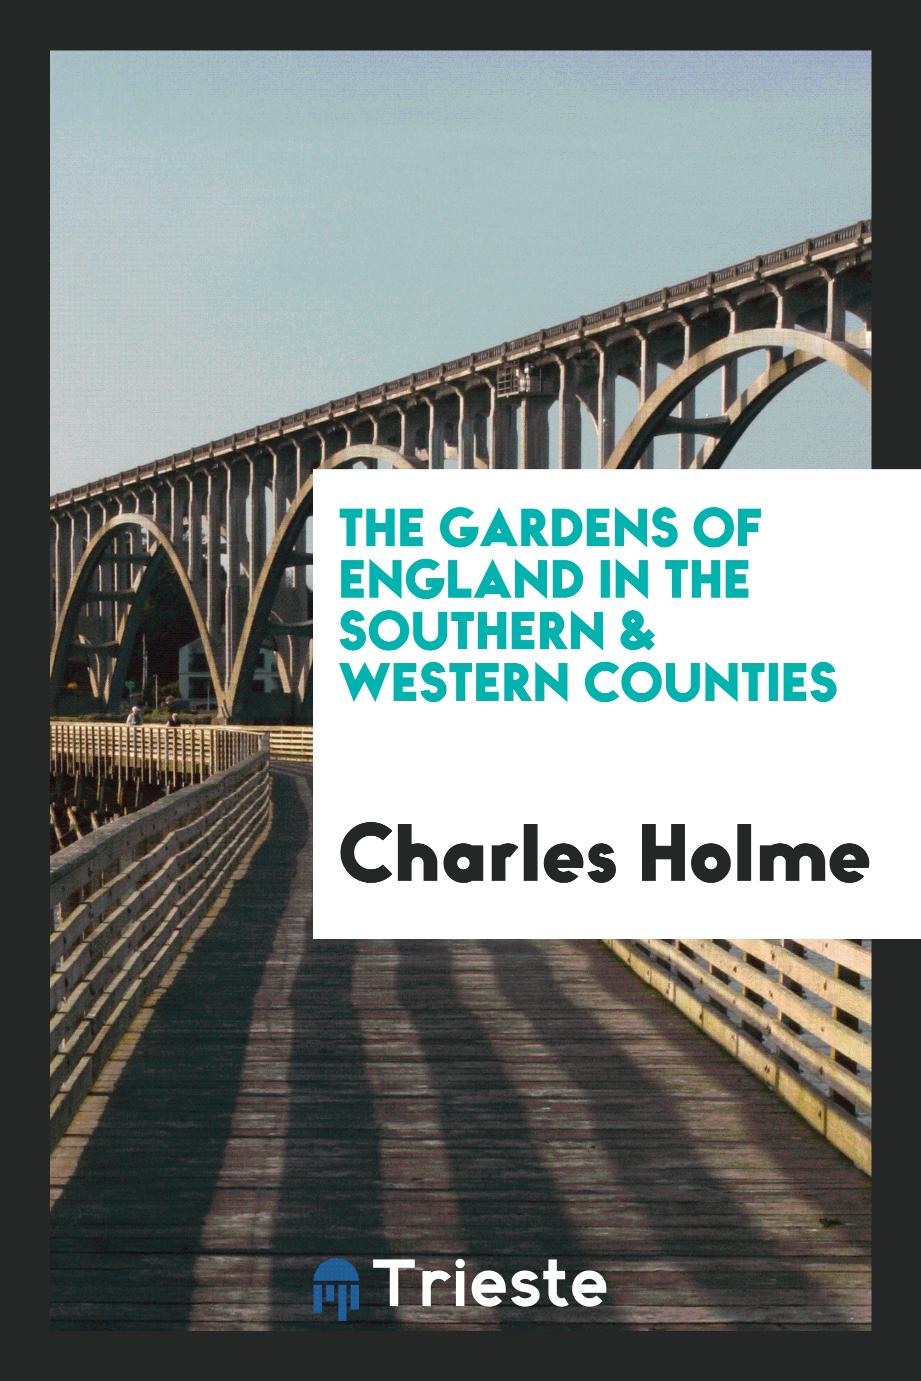 Charles Holme - The gardens of England in the southern & western counties